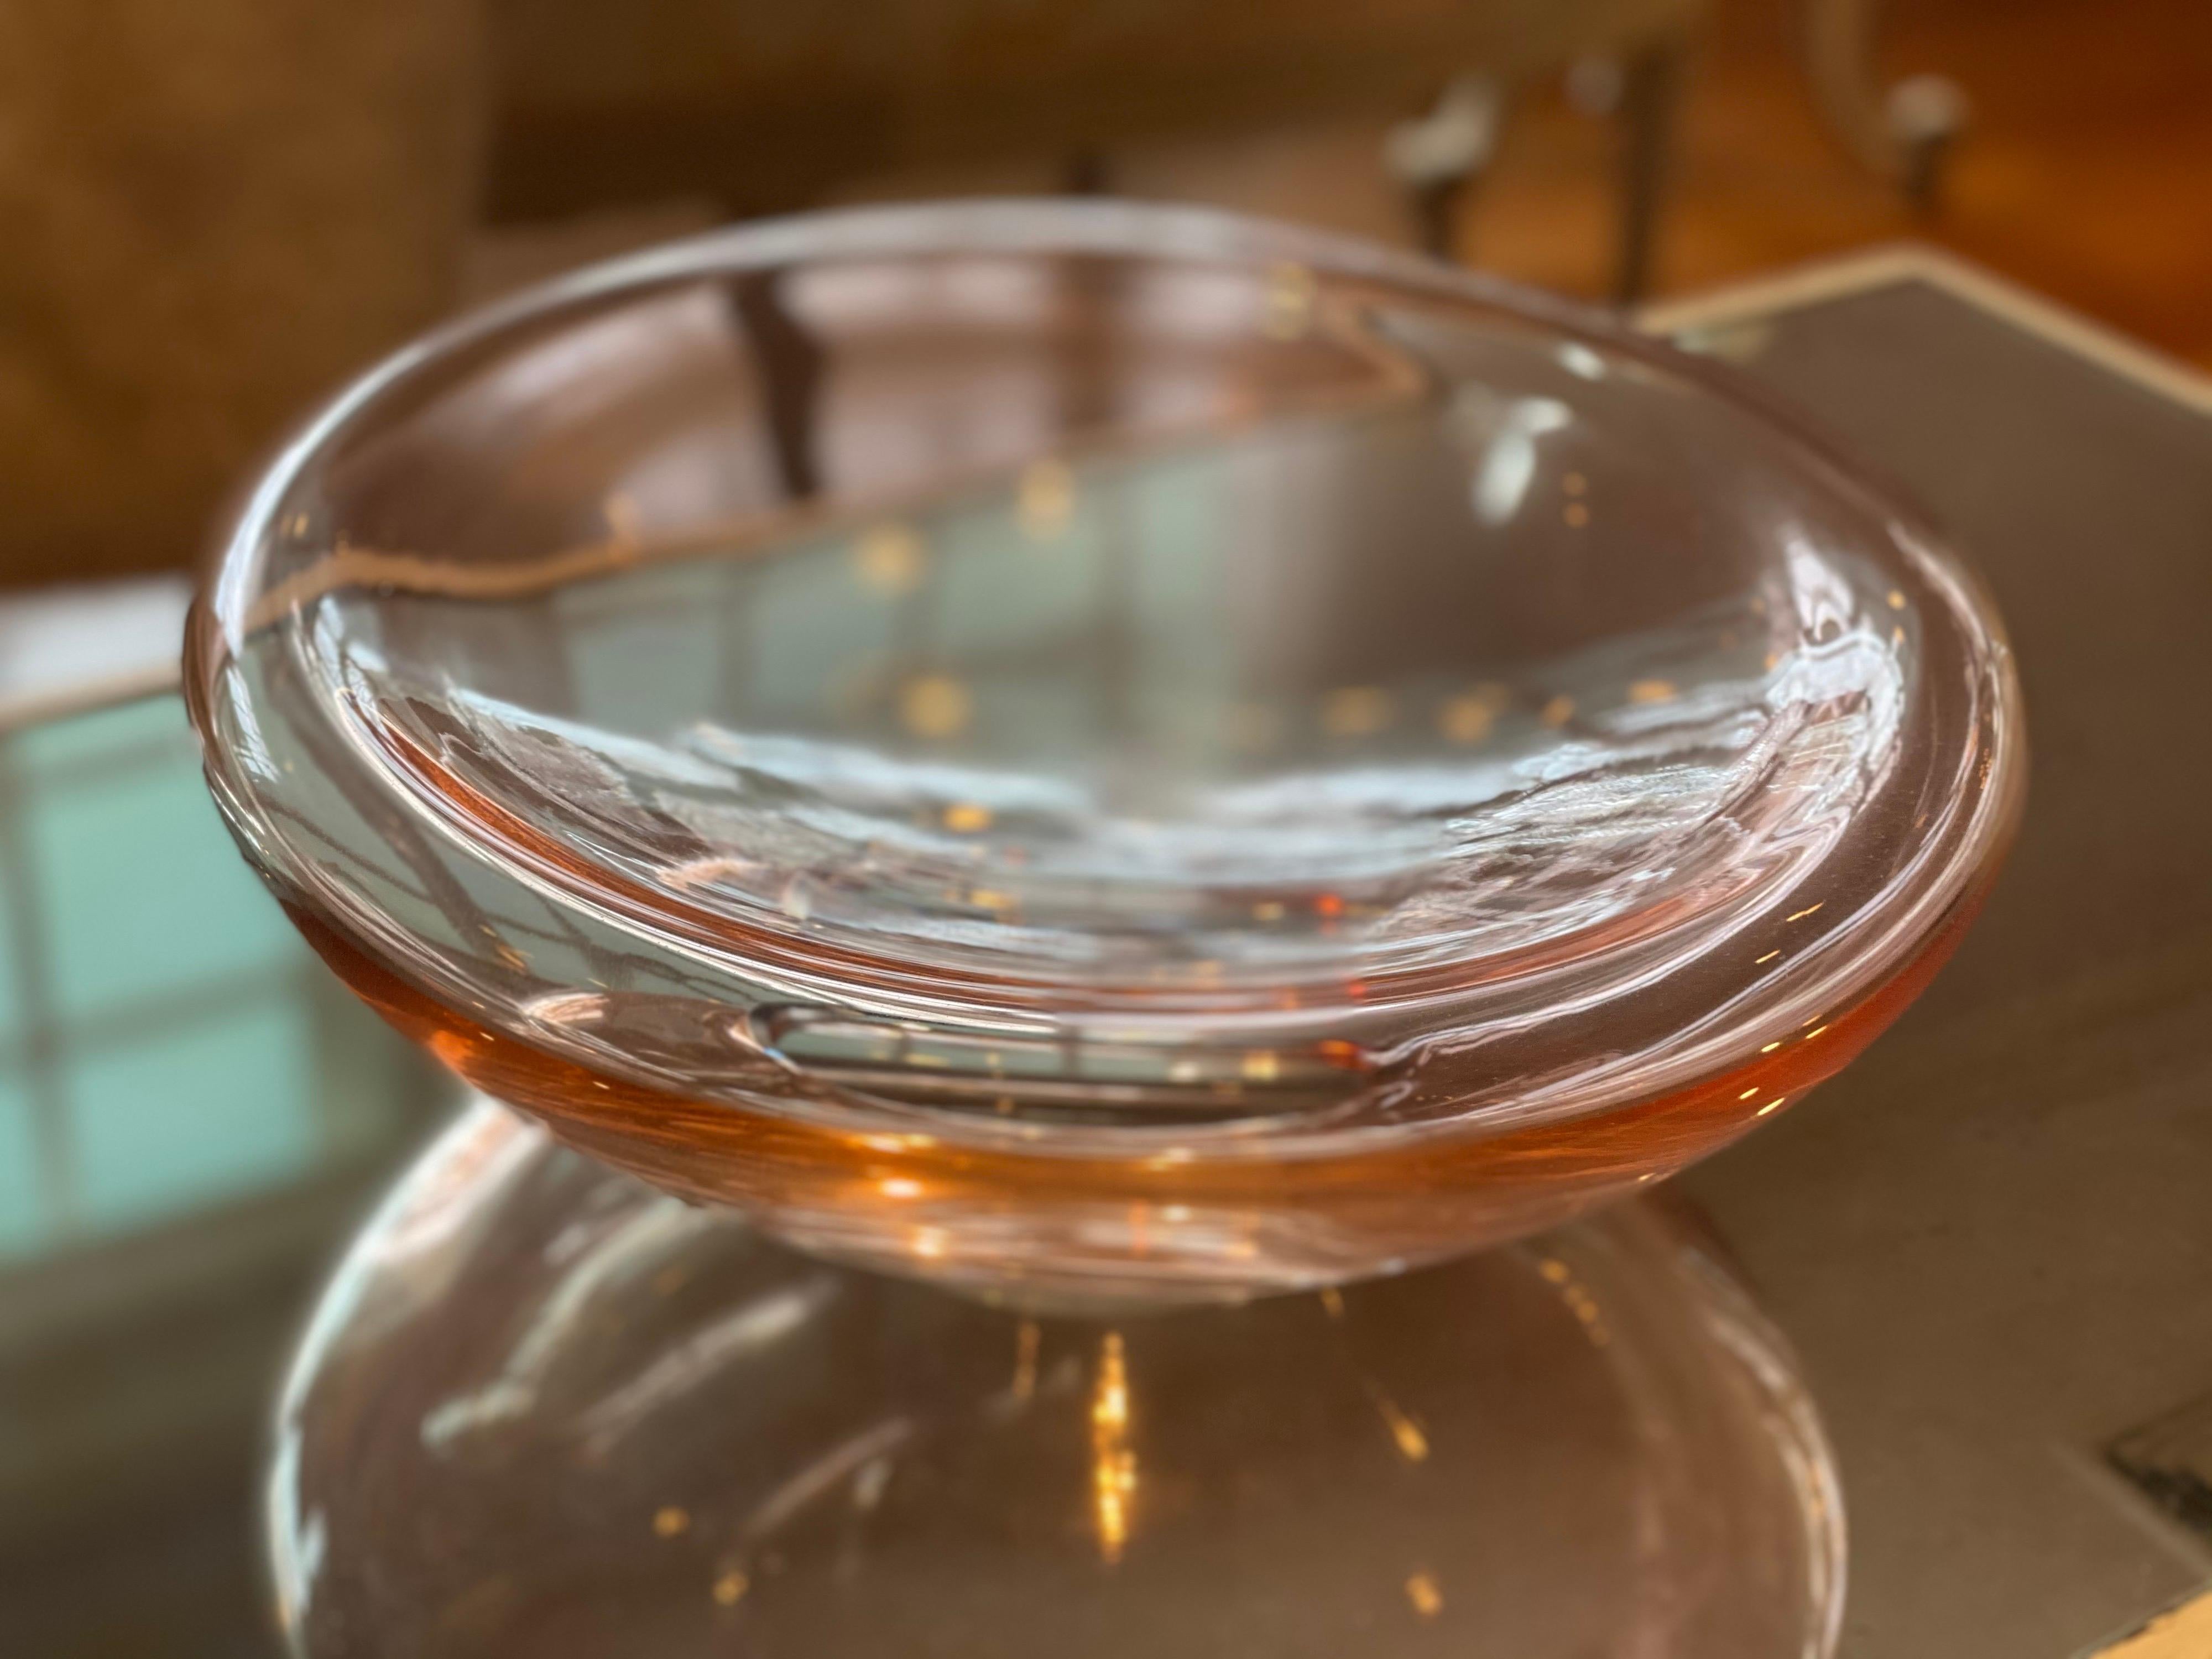 Rose colored glass bowl by Gucci. Marked 'Gucci' underside.
Gorgeous shape and style.
Measures: 13.5